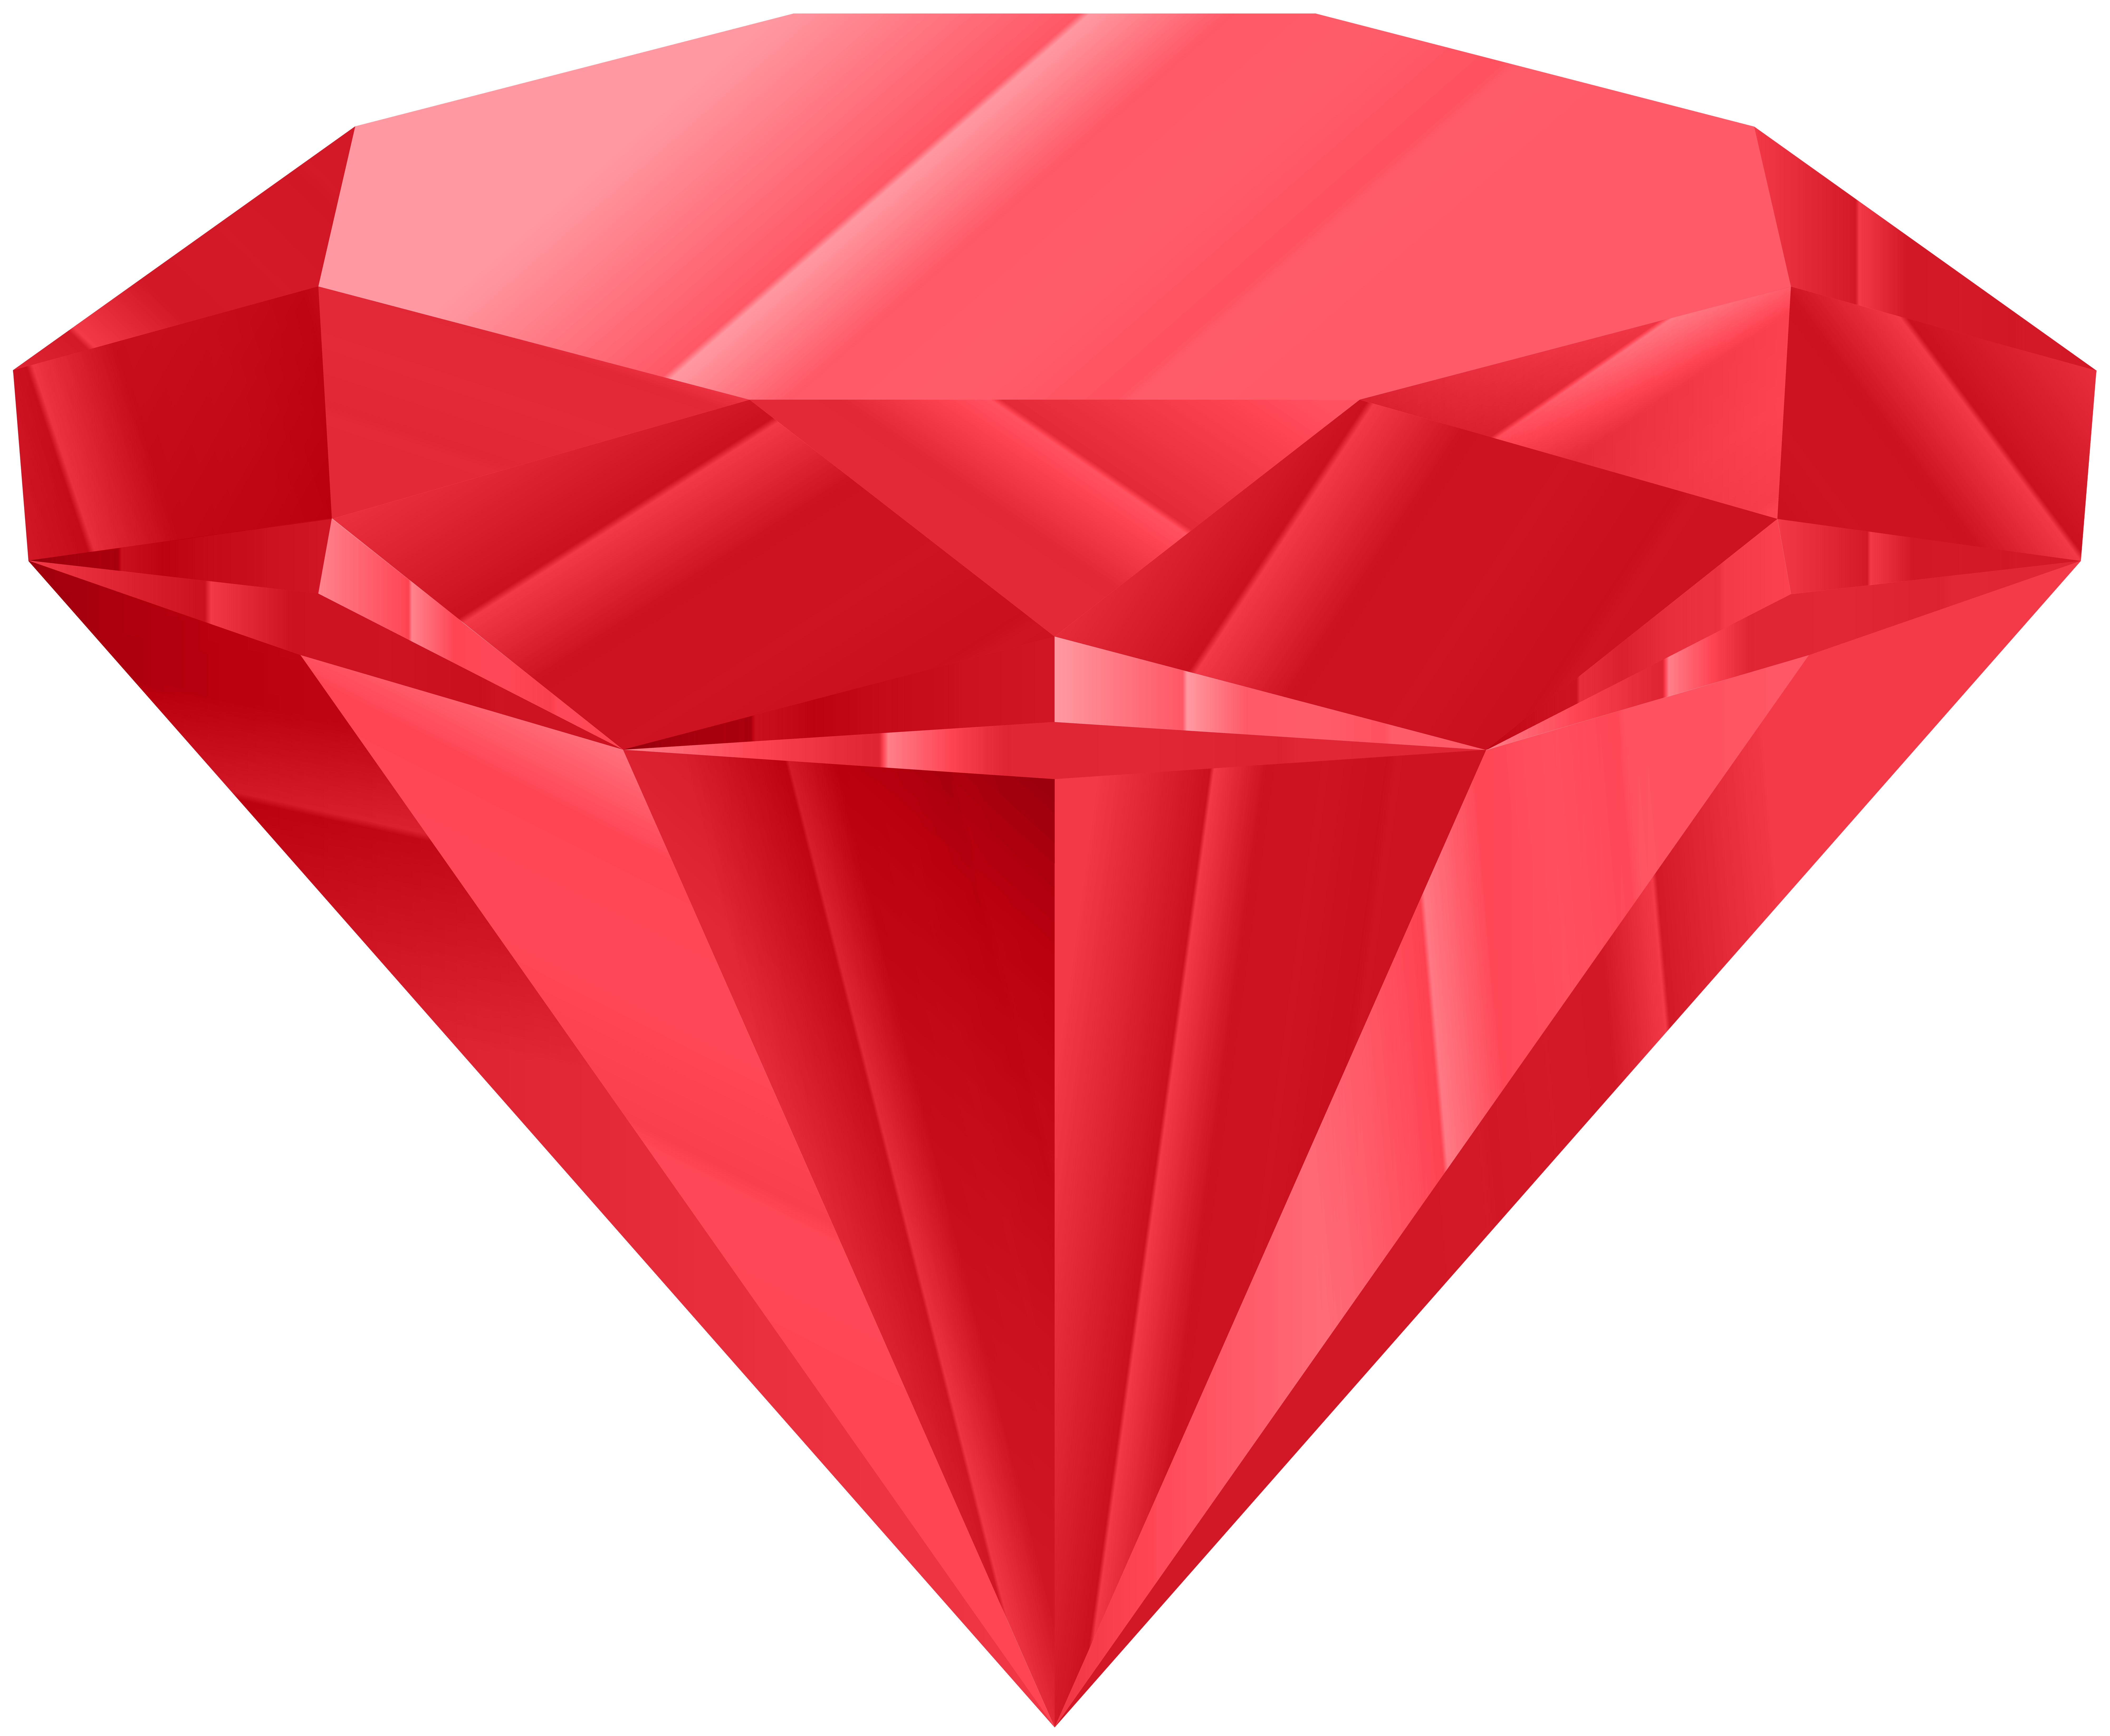 Red Diamond PNG Clip Art Image Quality Image And Transparent PNG Free Clipart